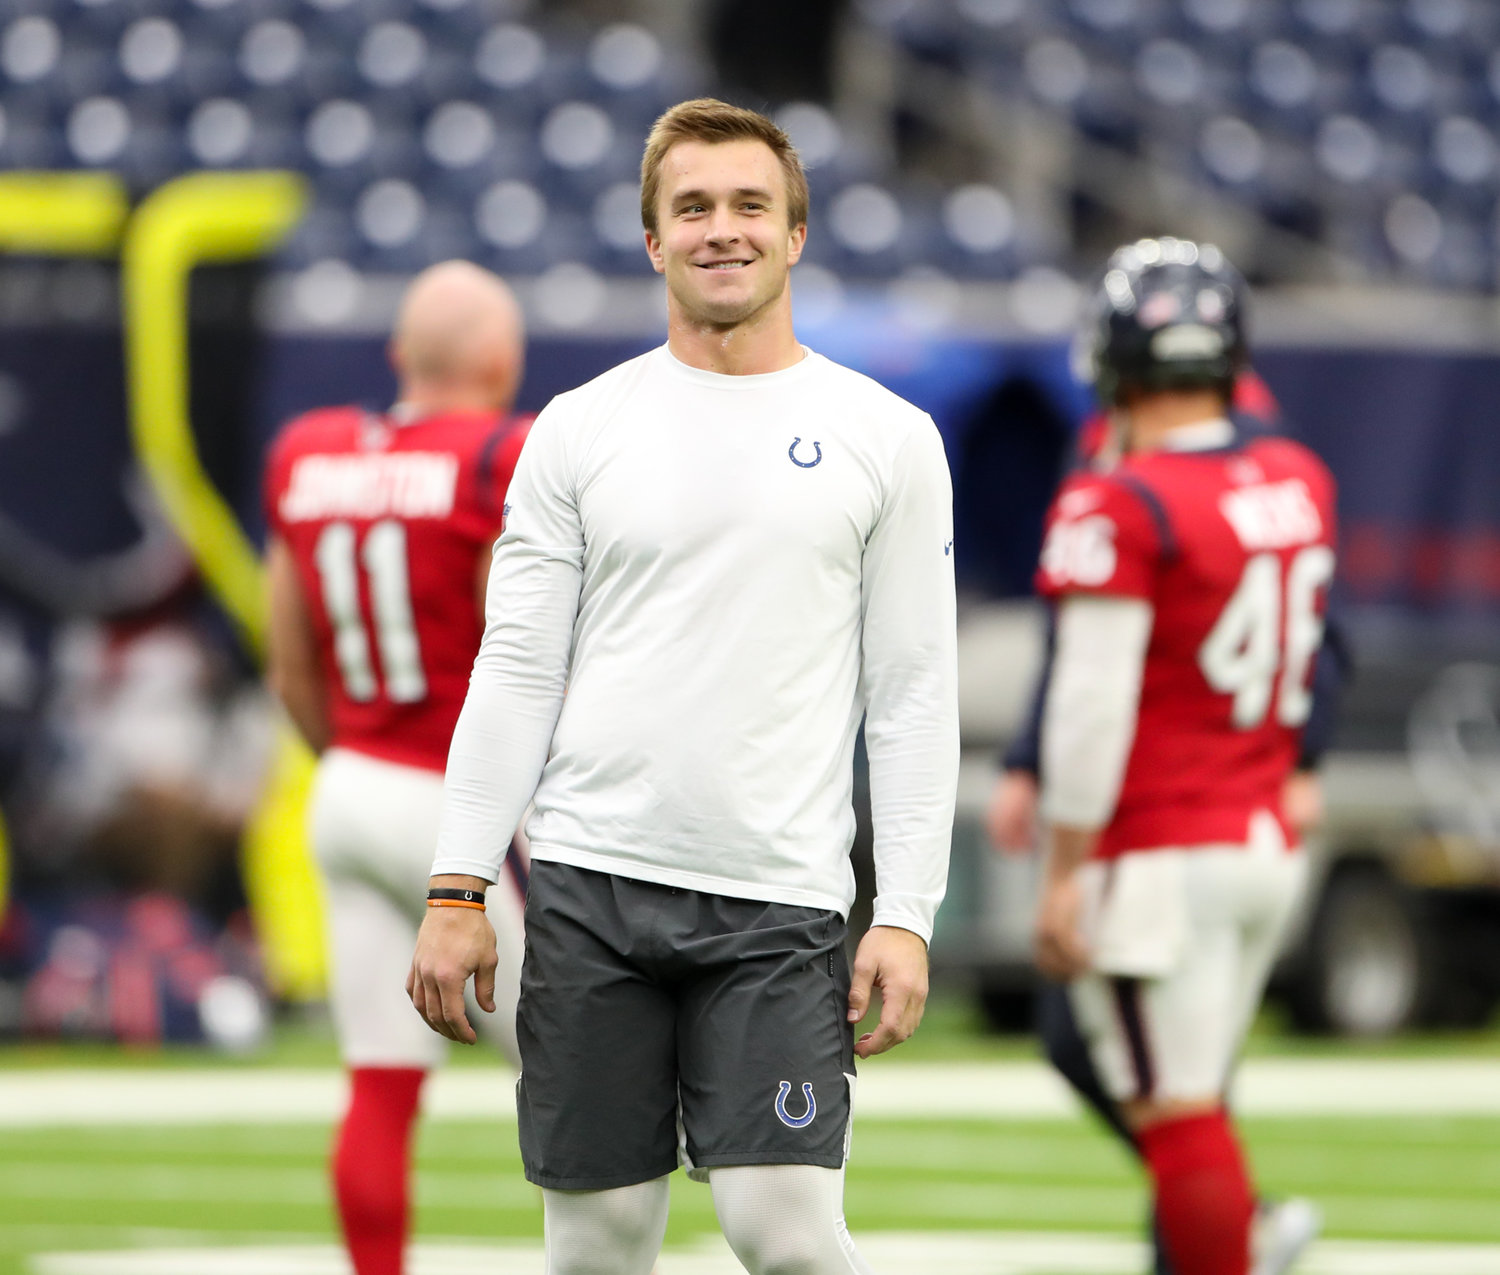 Indianapolis Colts and former Texas Longhorn and Westlake Chaparral quarterback Sam Ehlinger (4) warms up before an NFL game between the Texans and the Colts on December 5, 2021 in Houston, Texas.